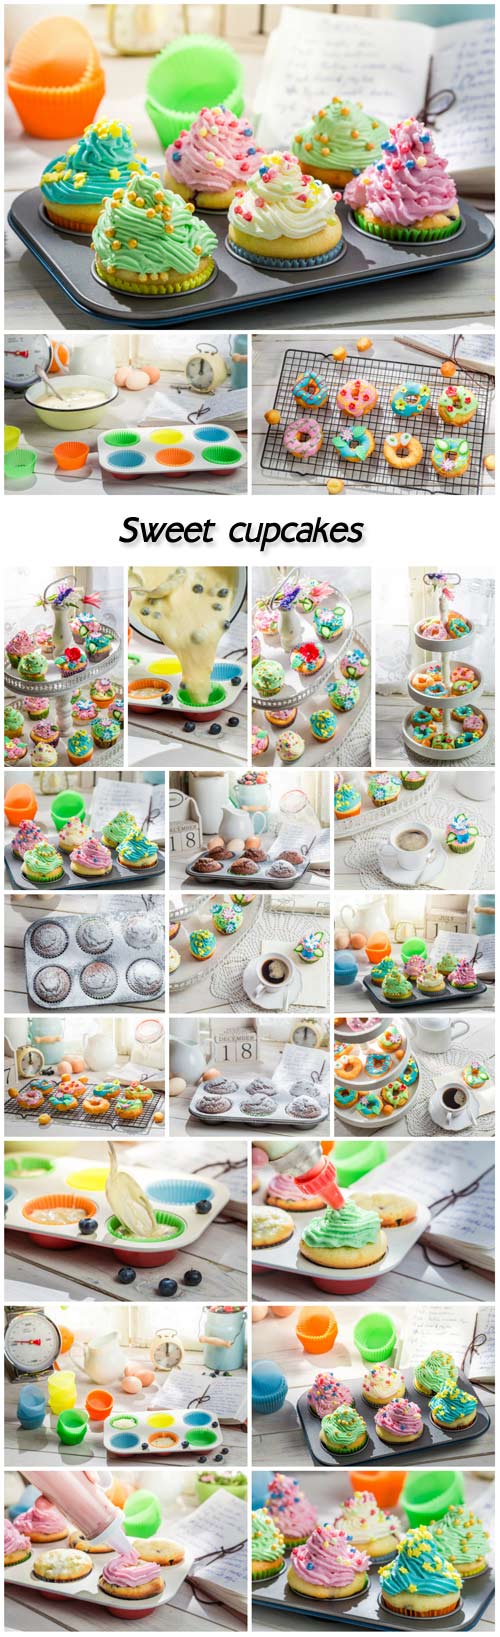 Preparation for sweet cupcakes with cream and decoration